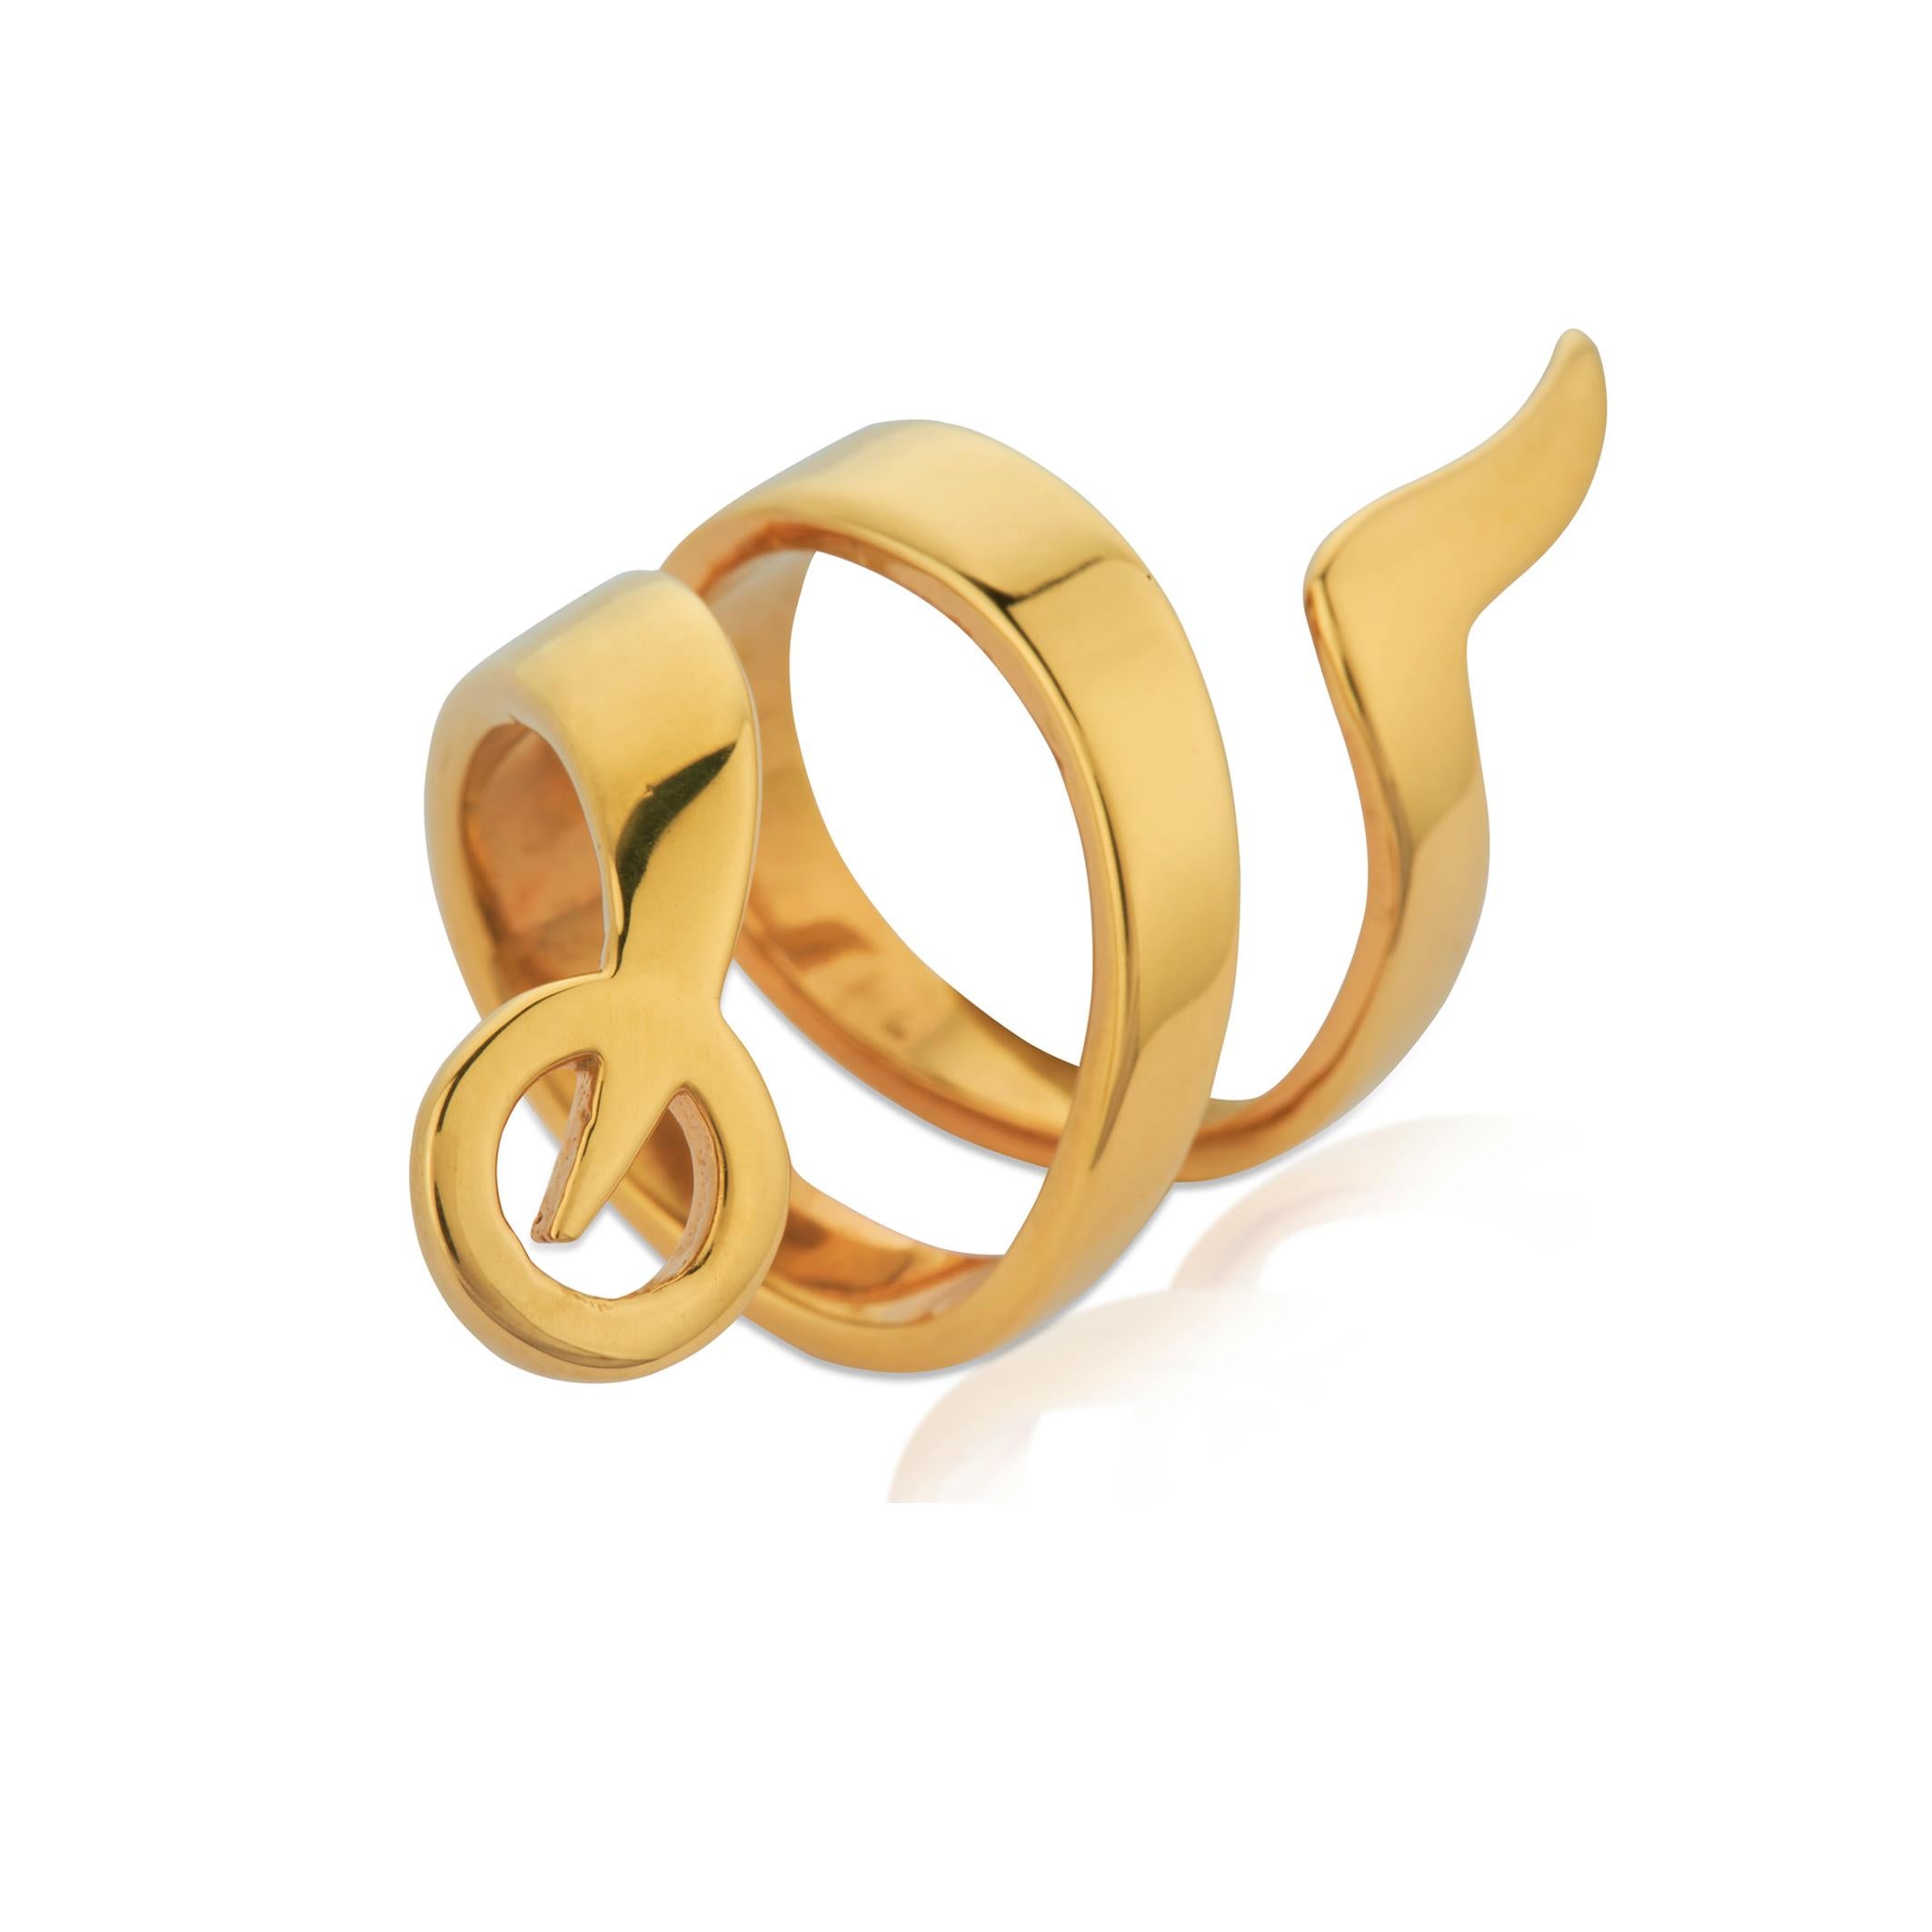 Abstract snake ring in 18k yellow gold vermeil
Shaped to perfectly wind around your finger for a touch of sensuality
Size UK P - US 7 1/2 in stock, more sizes available made to order
Elegant and modern design inspired by the '60s space age